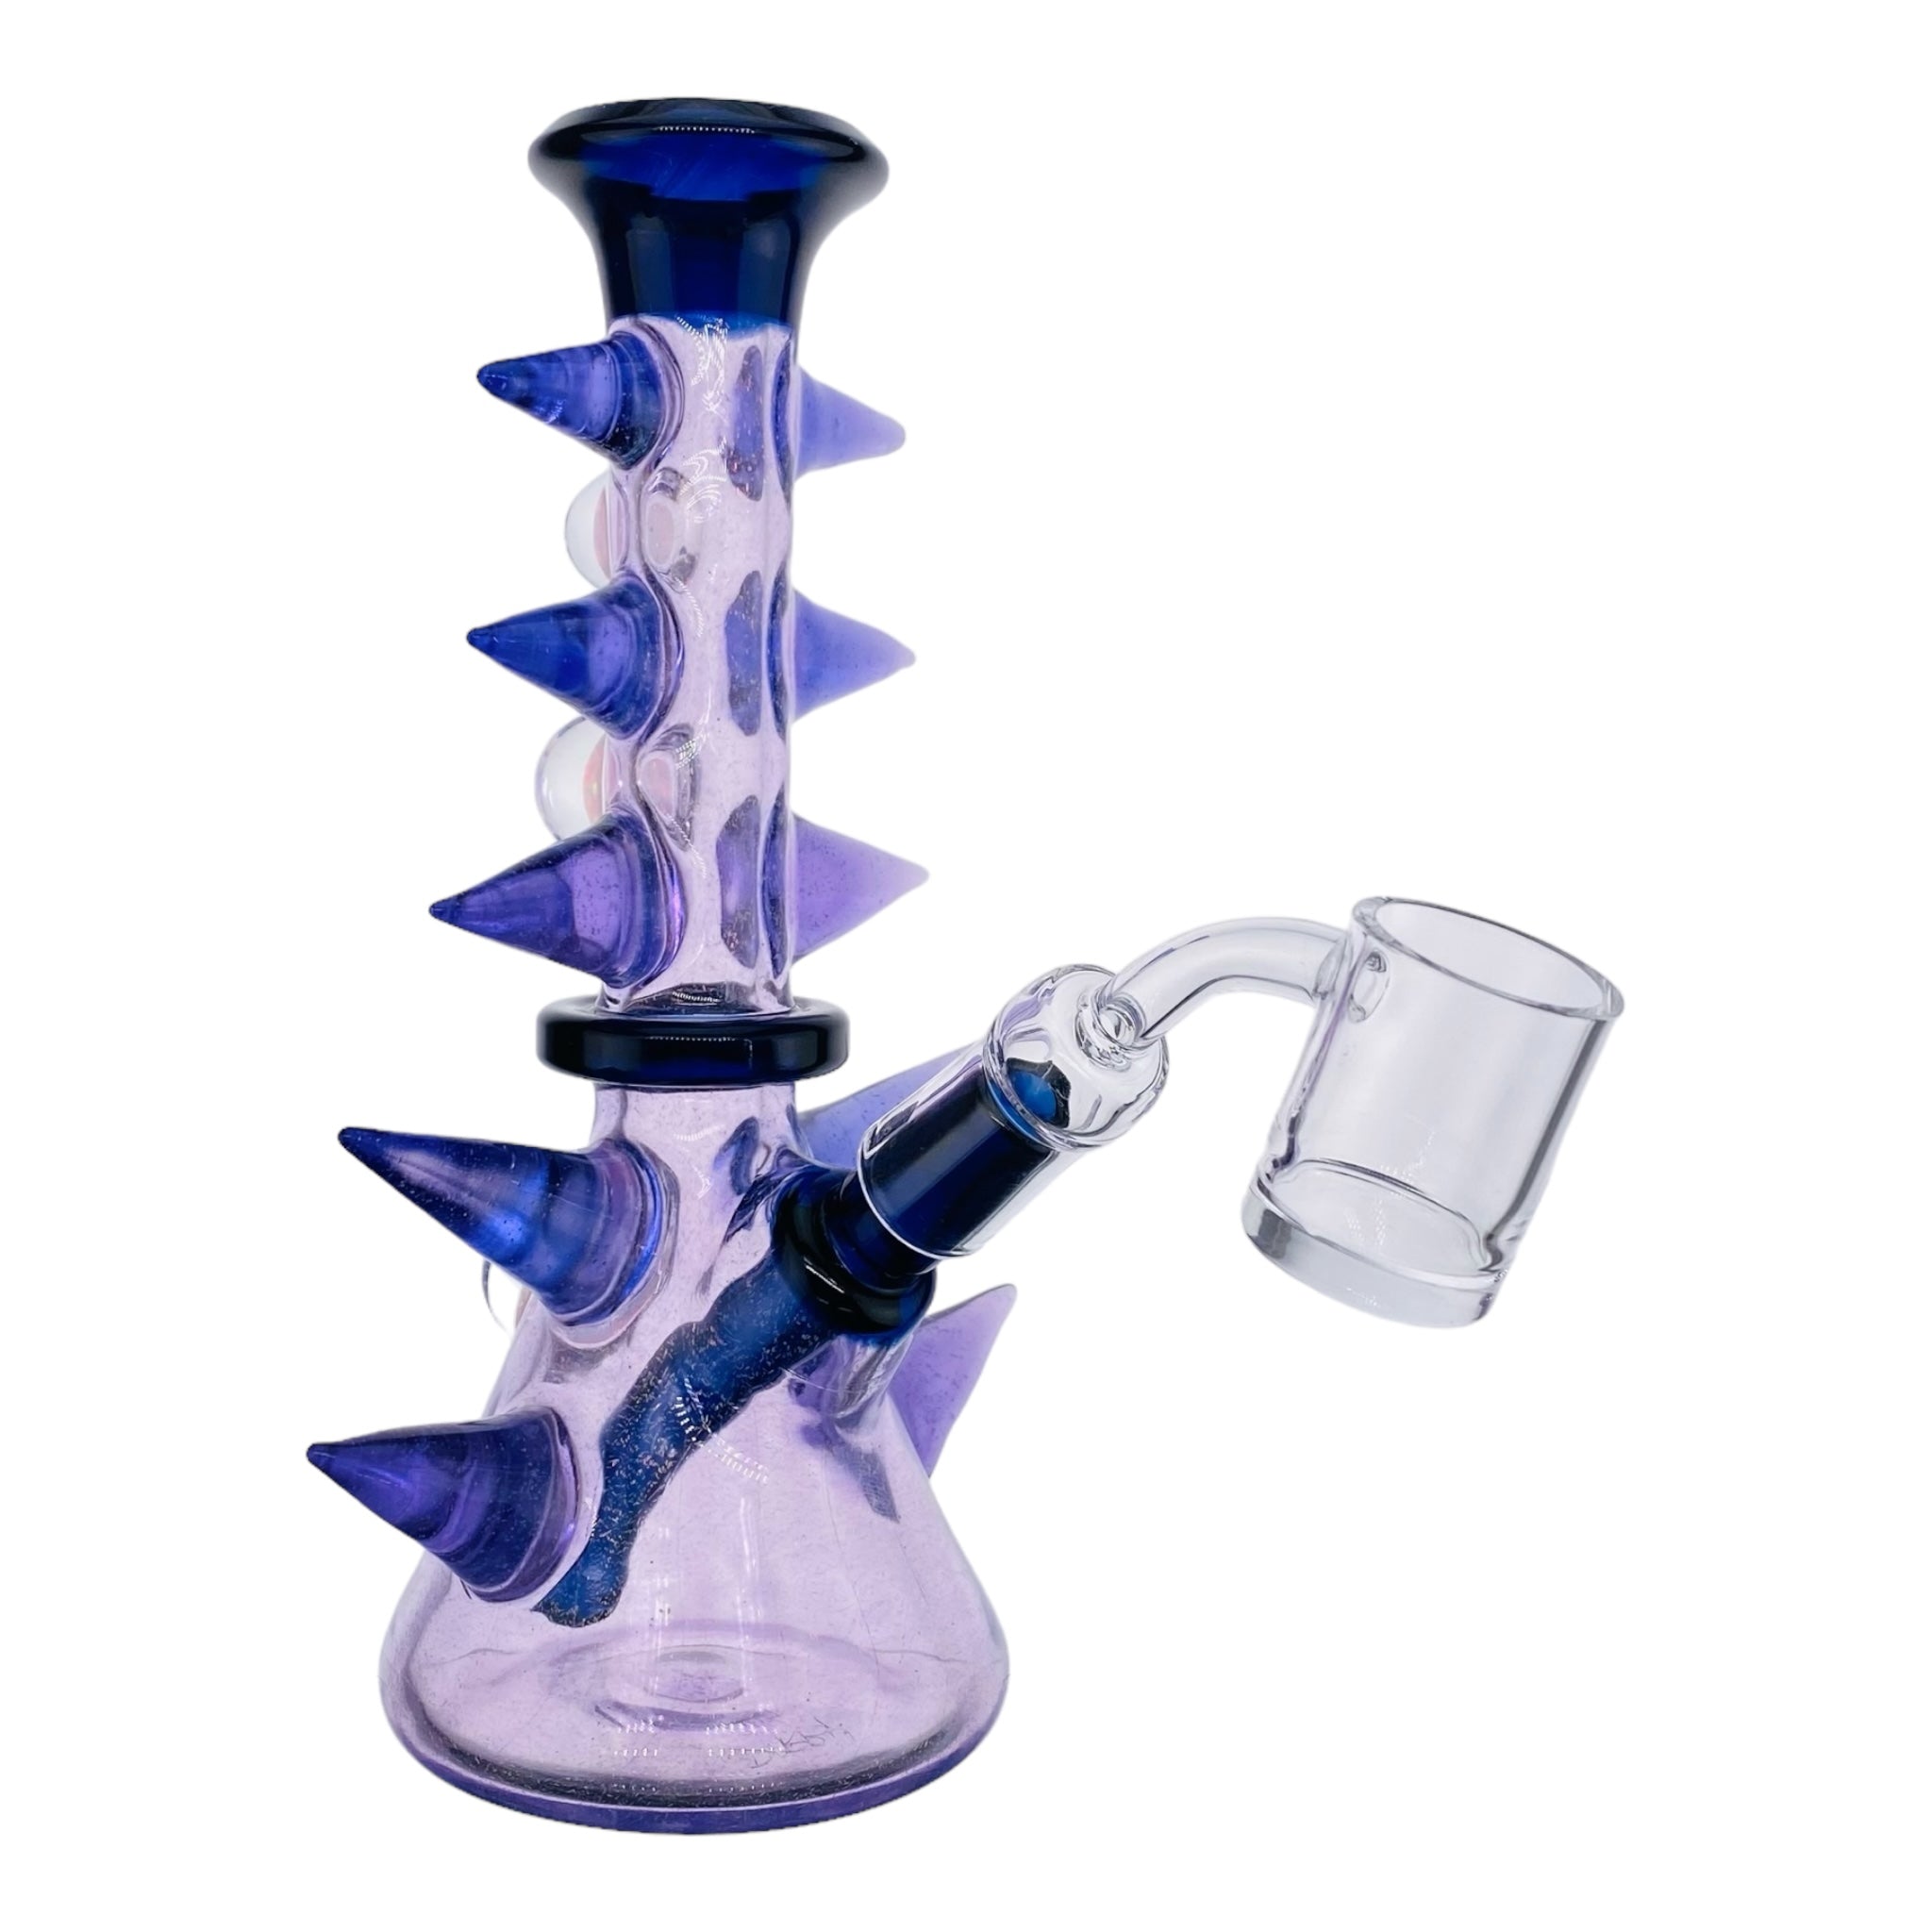 Darby Holm - Purple Reign Dichro Horned Minitube Dab Rig Water Pipe With Large Opals